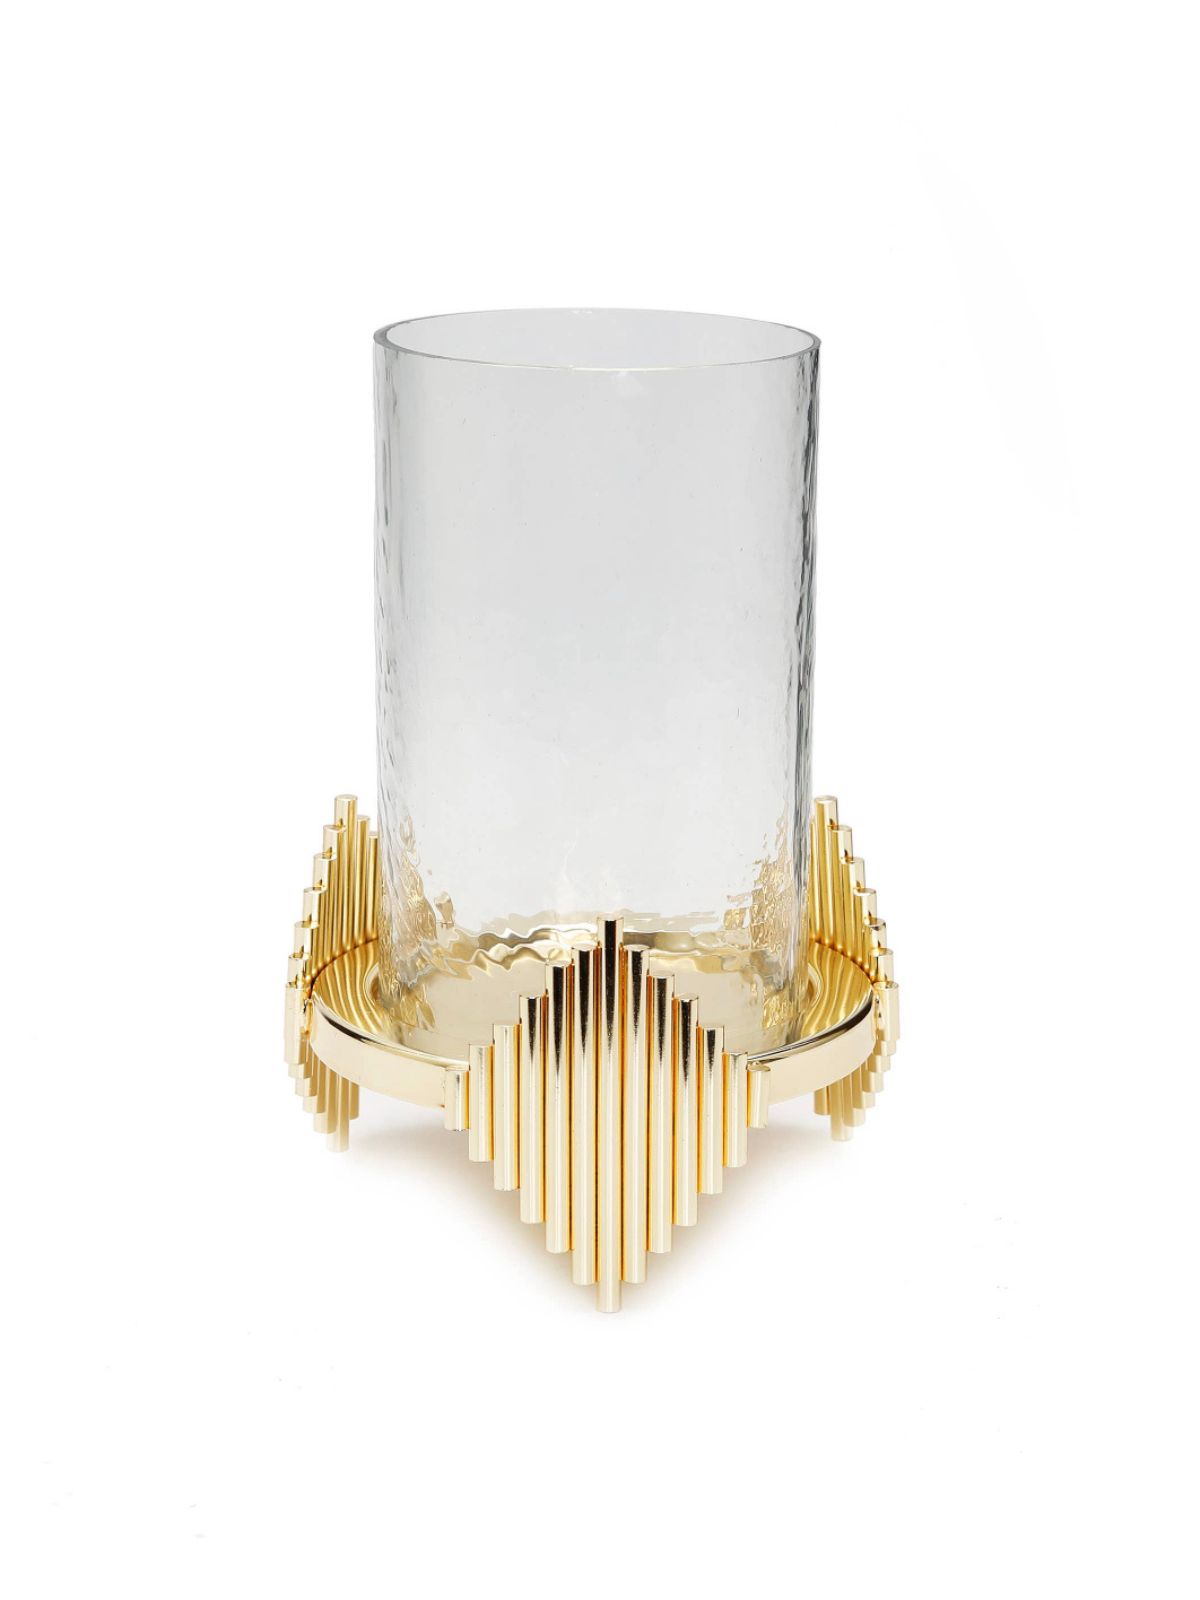 This stunning Glass Dome Candle Holder has an amazing Gold Diamond Design, 4D x 8H.